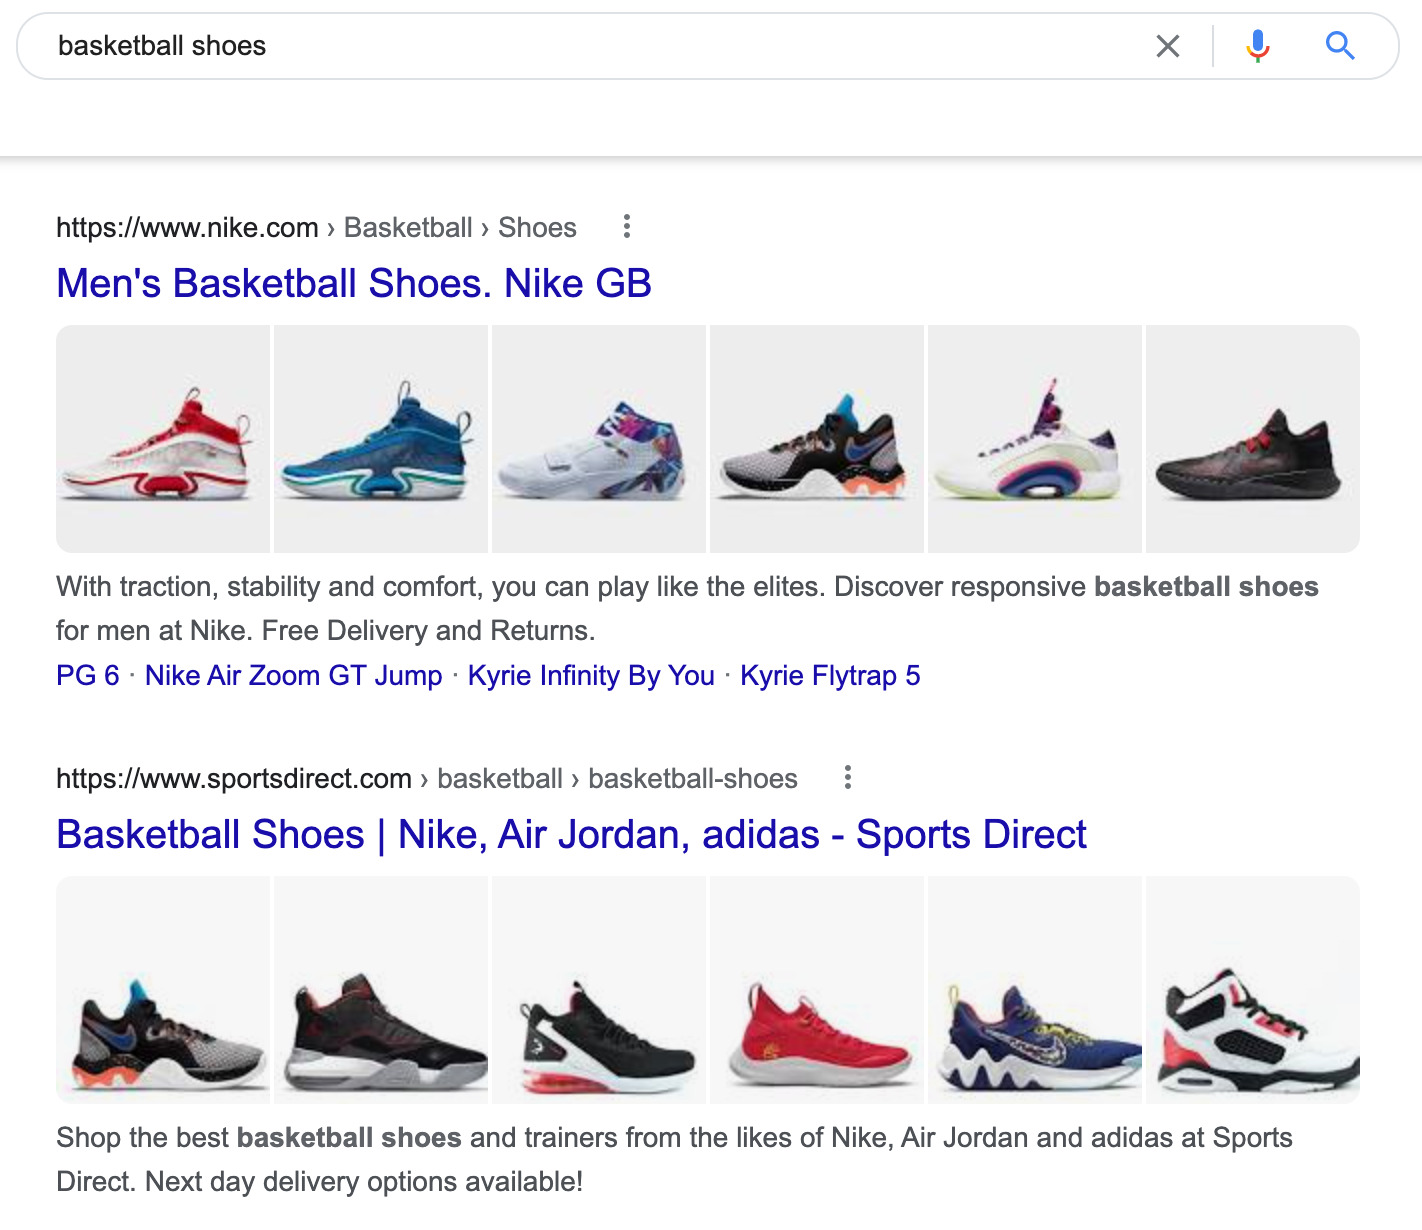 SERP for "basketball shoes"
